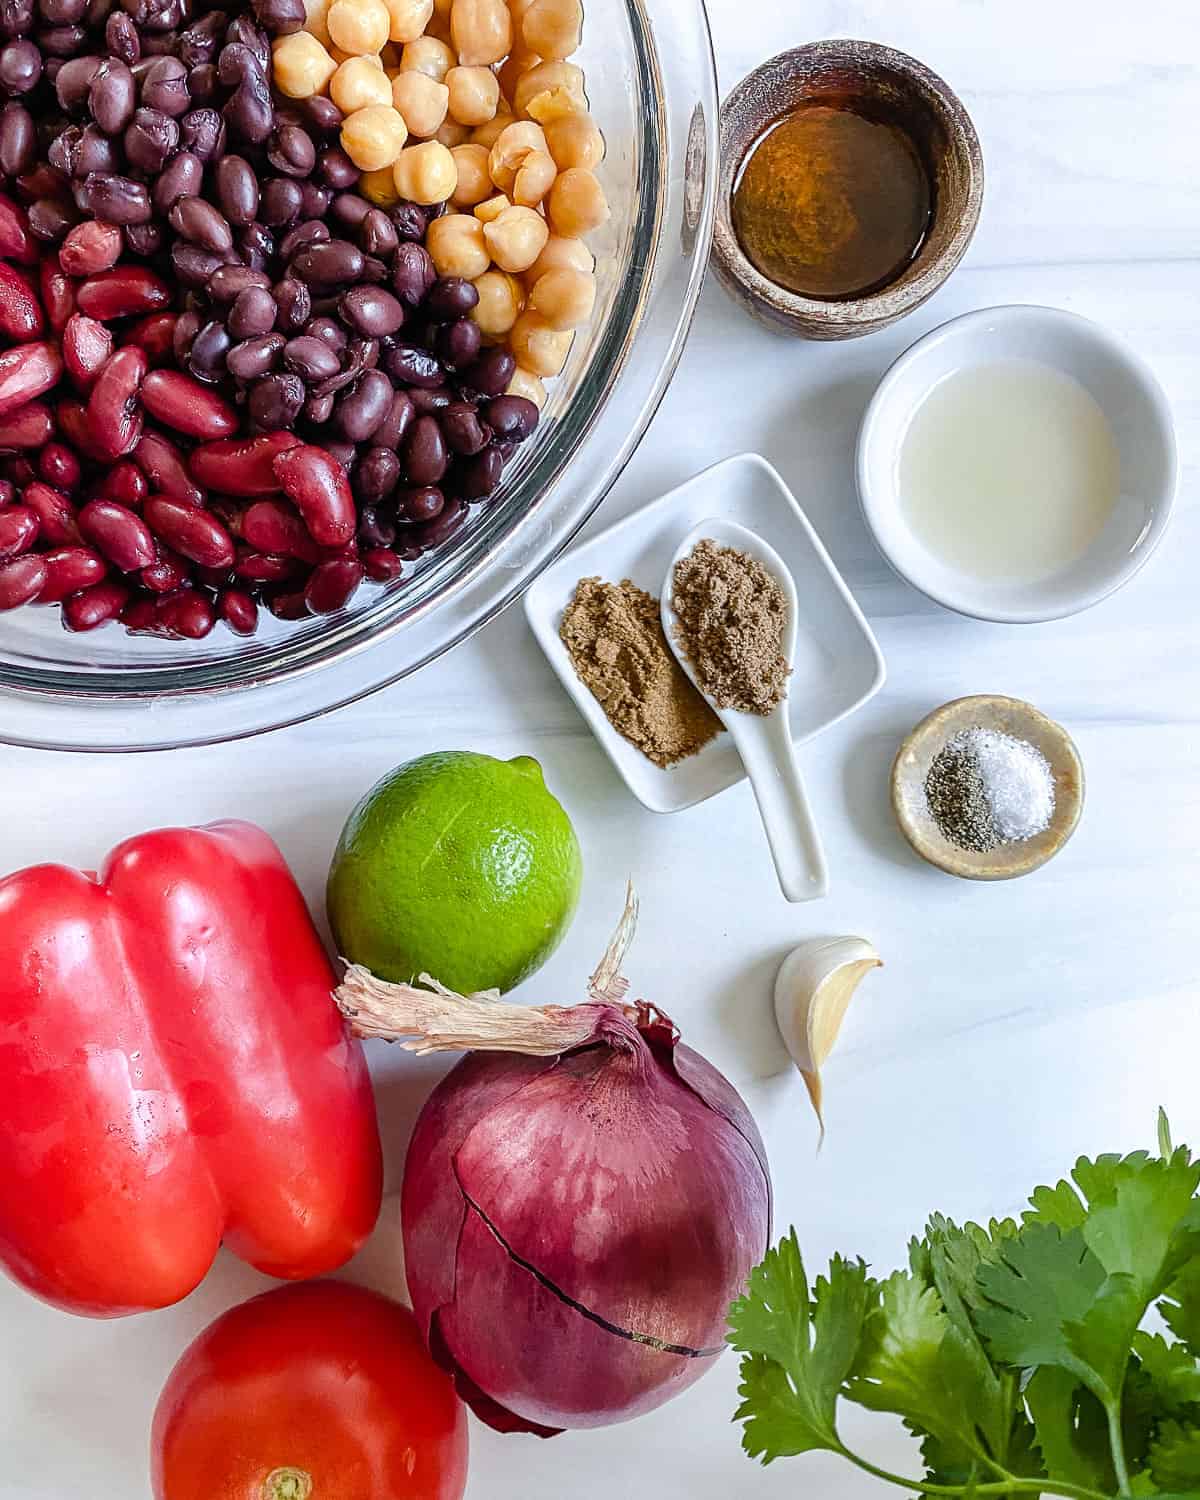 ingredients for mixed bean salad against a white background